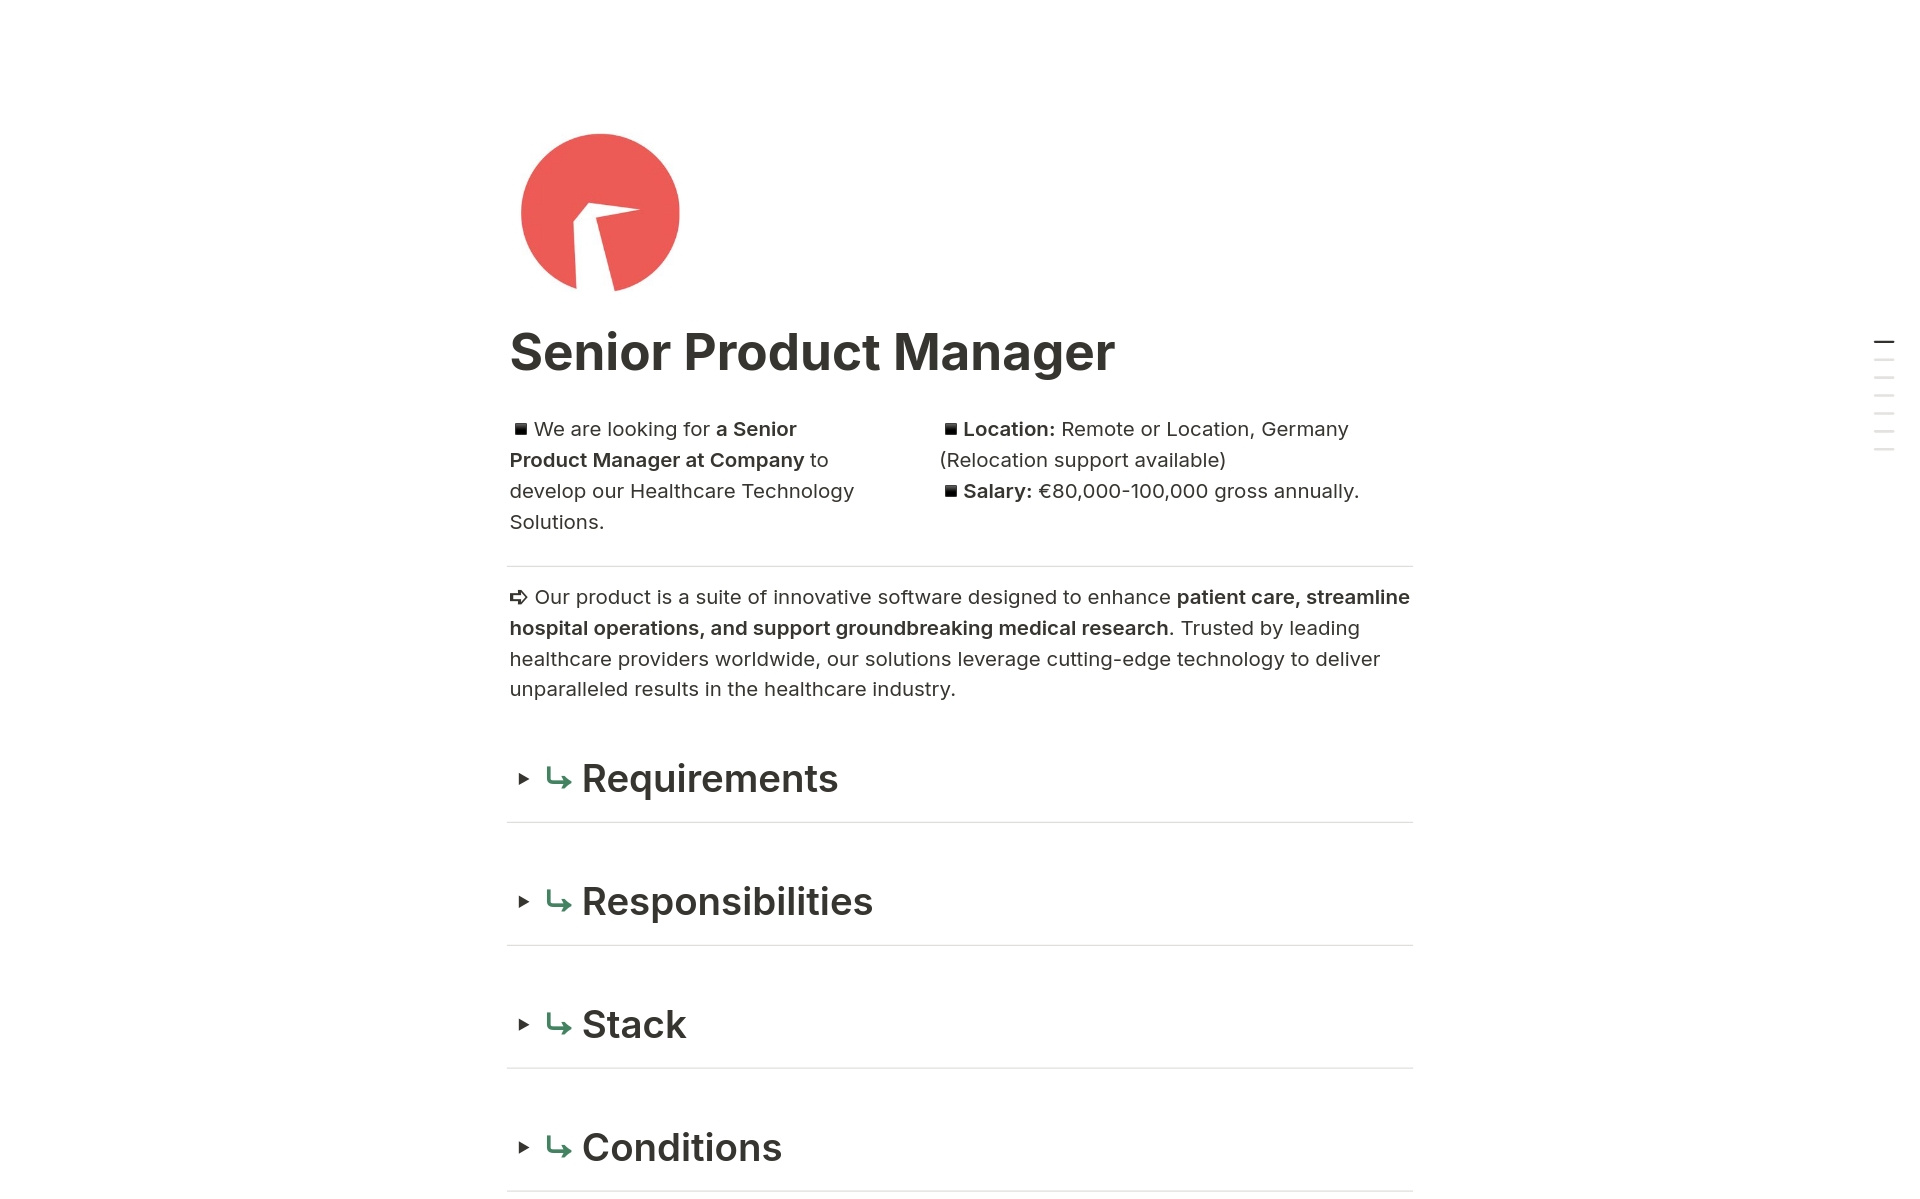 ✨ A convenient Notion template with the job descriptions candidates want. It covers key points to ensure you highlight the most important details. Just copy, add your specifics, and in 4 minutes, your job posting will be ready and appealing! 🚀